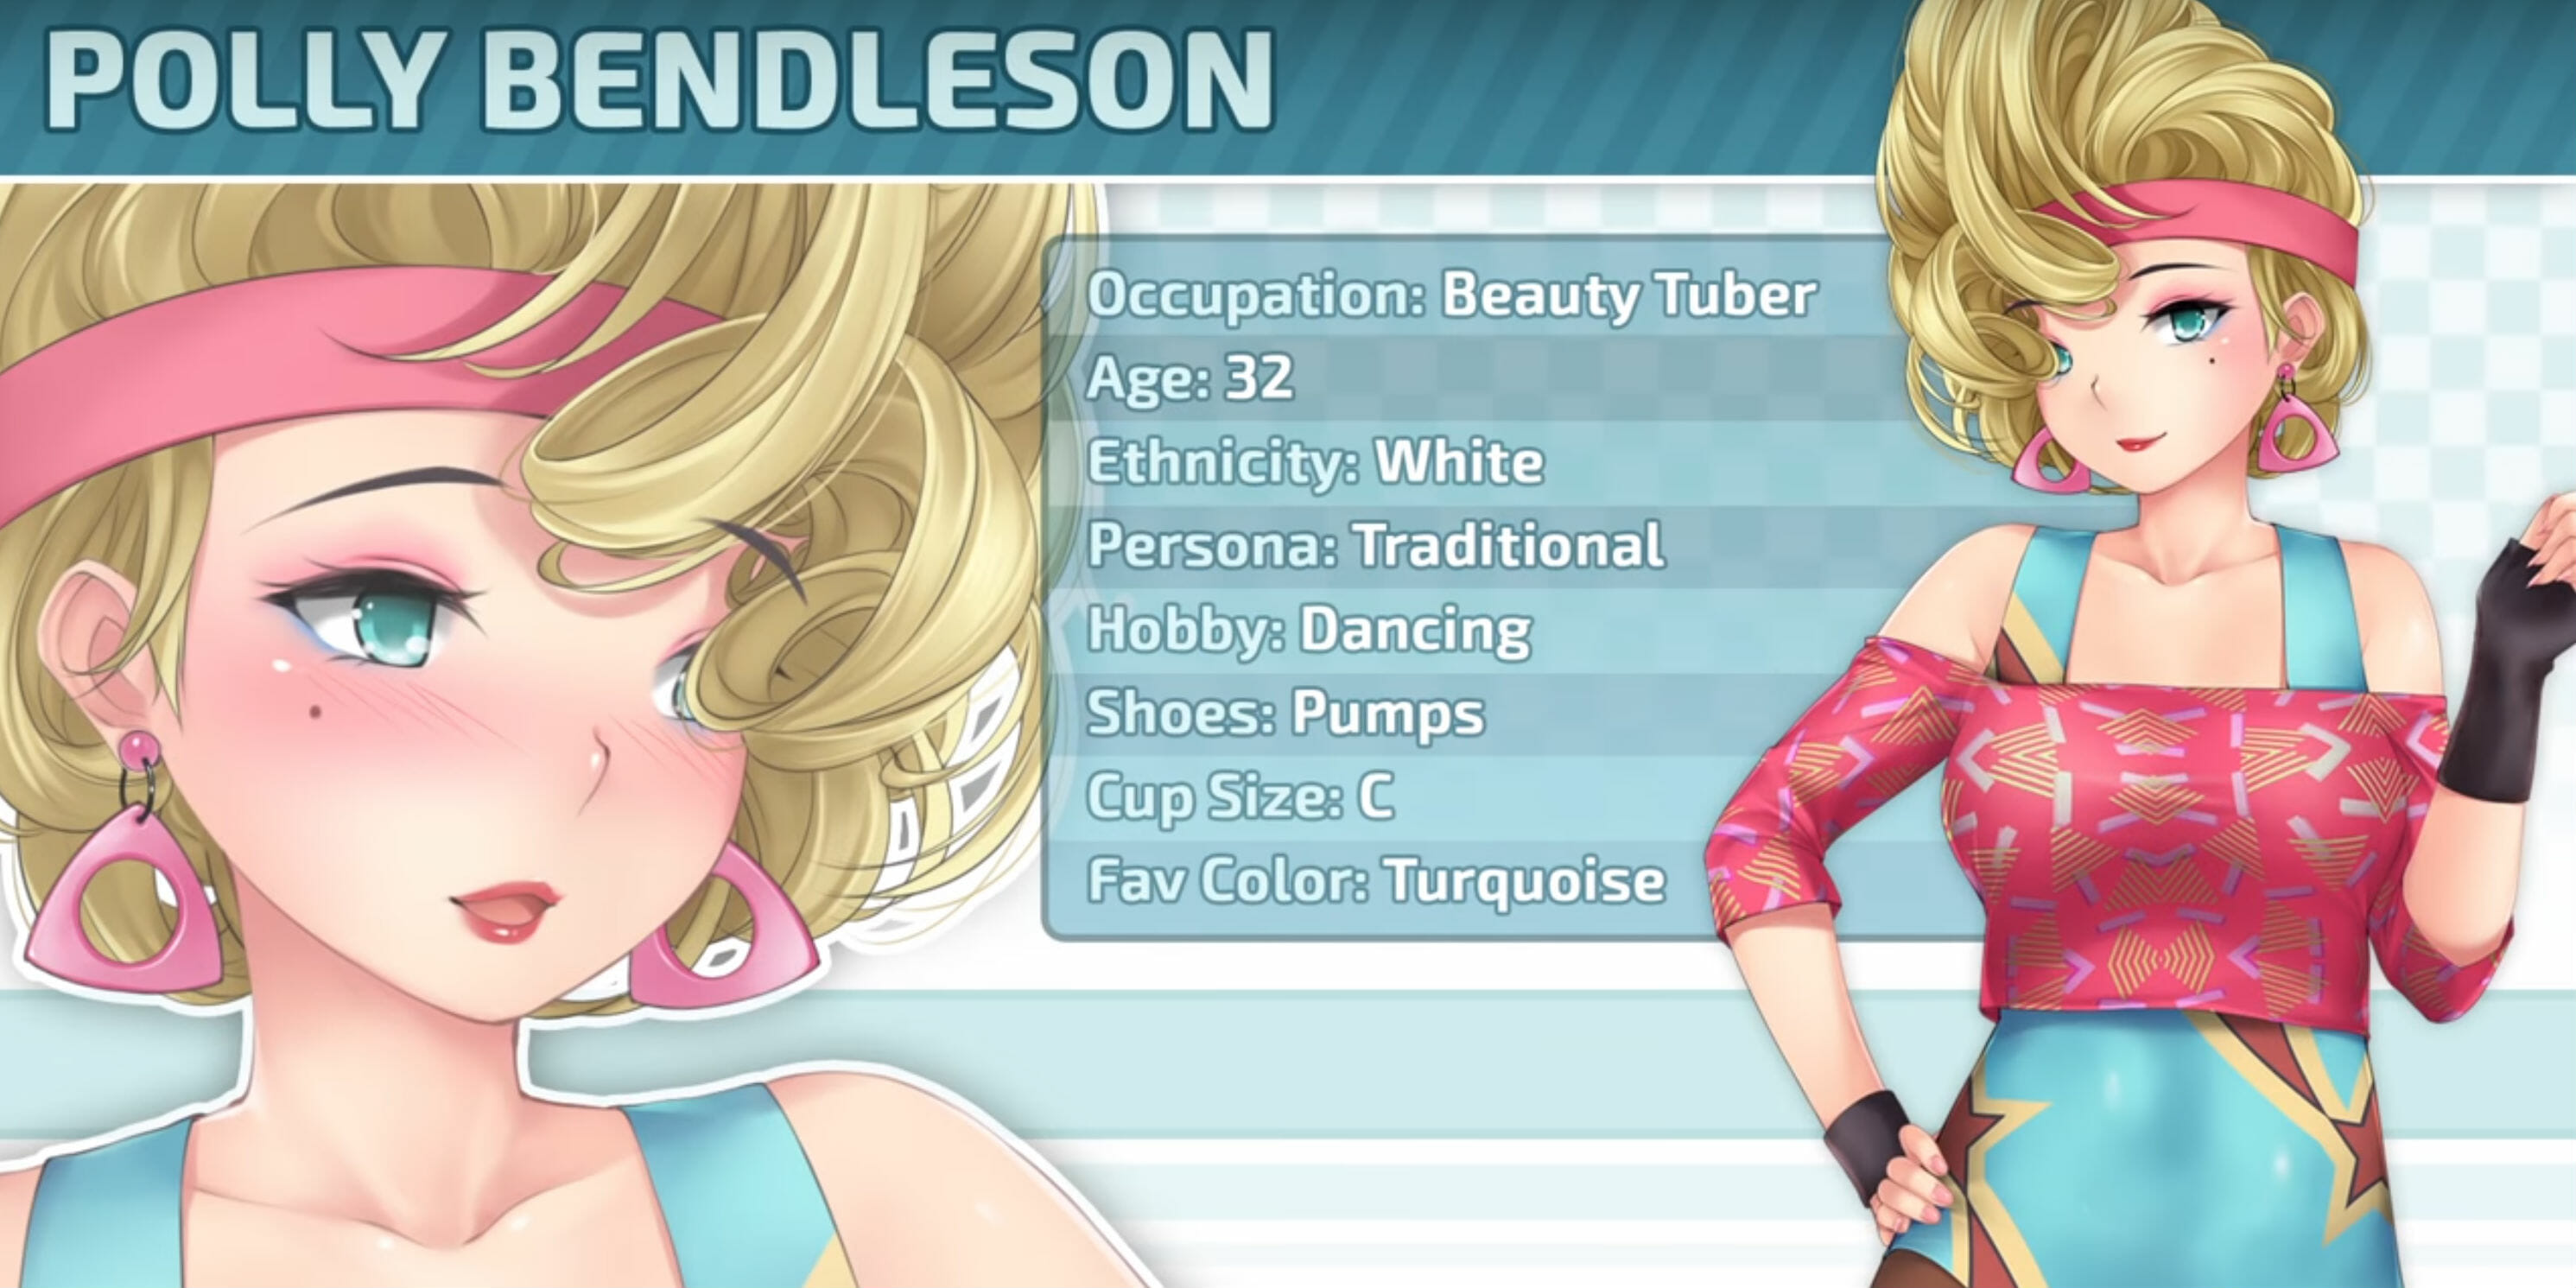 huniepop pictures and text